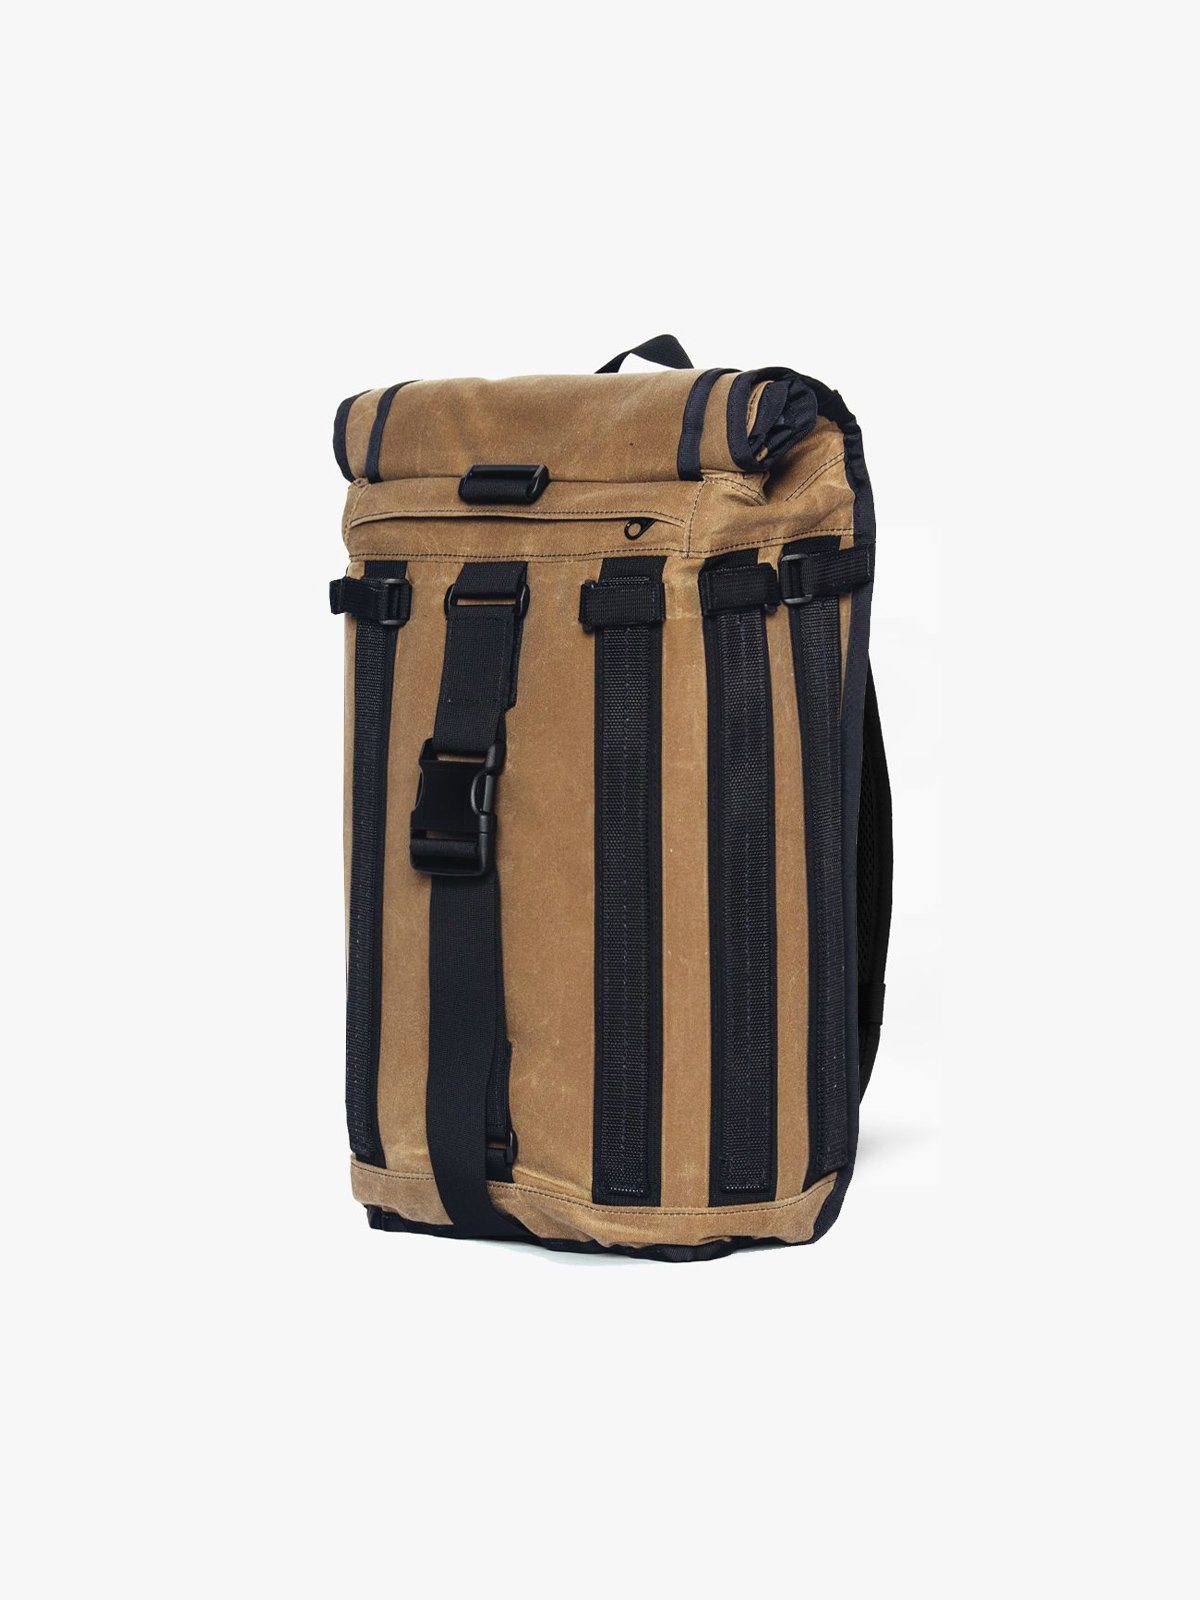 R6 Arkiv Field Pack 40L by Mission Workshop - Bolsas impermeables y ropa técnica - San Francisco & Los Angeles - Built to endure - Guaranteed forever